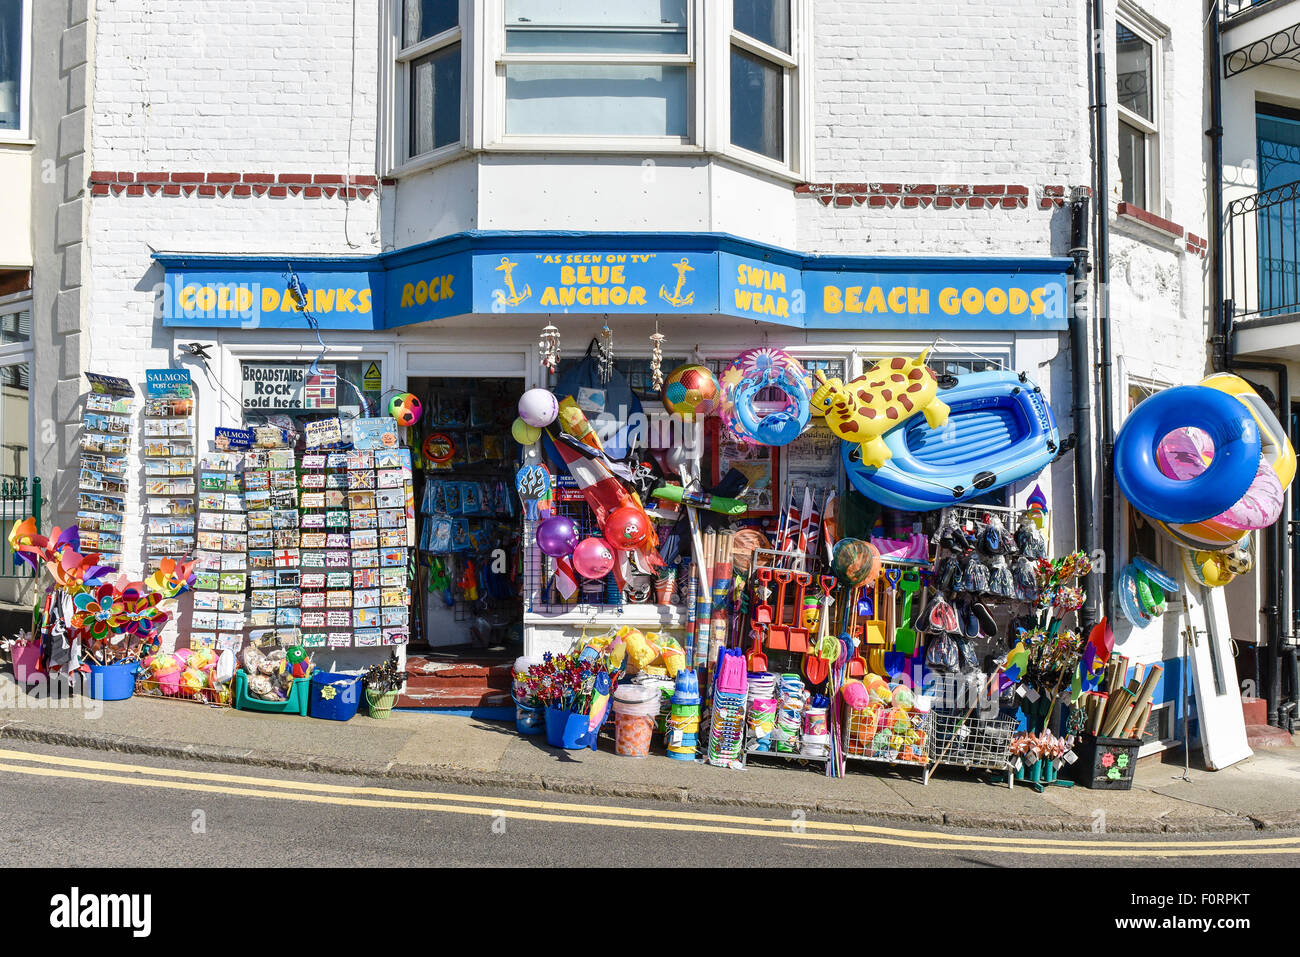 A shop selling traditional beach toys and goods in Broadstairs, Kent. Stock Photo